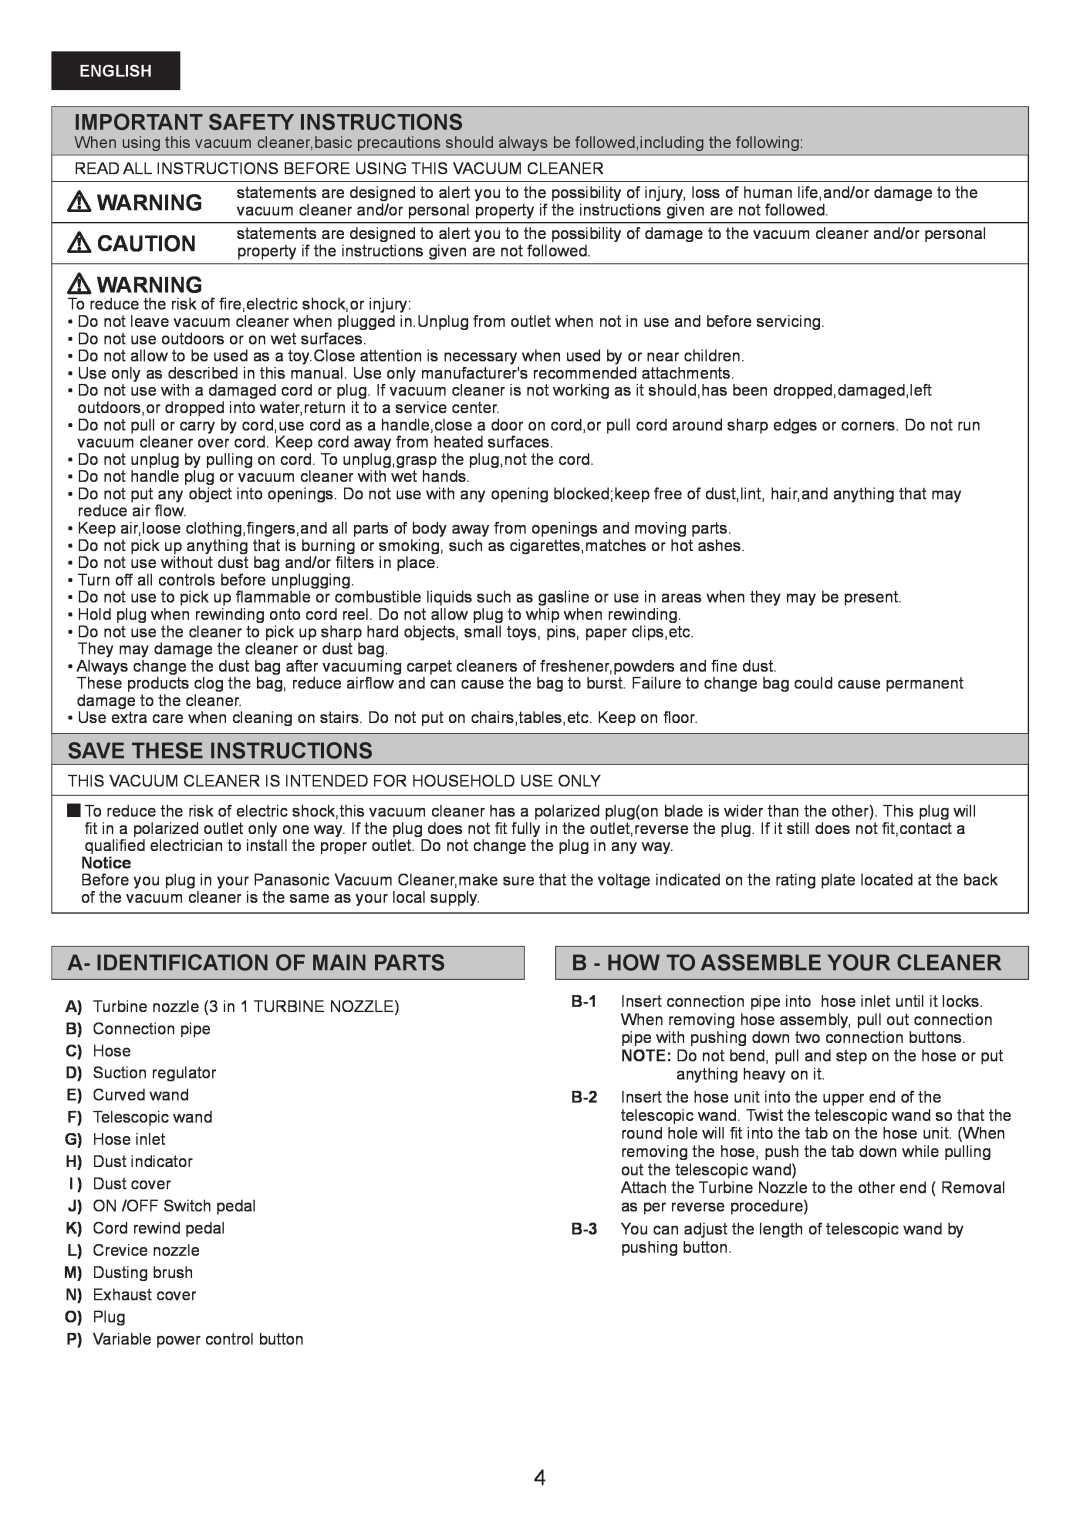 Panasonic MC-CG467 manual Important Safety Instructions, Save These Instructions, A- Identification Of Main Parts, English 